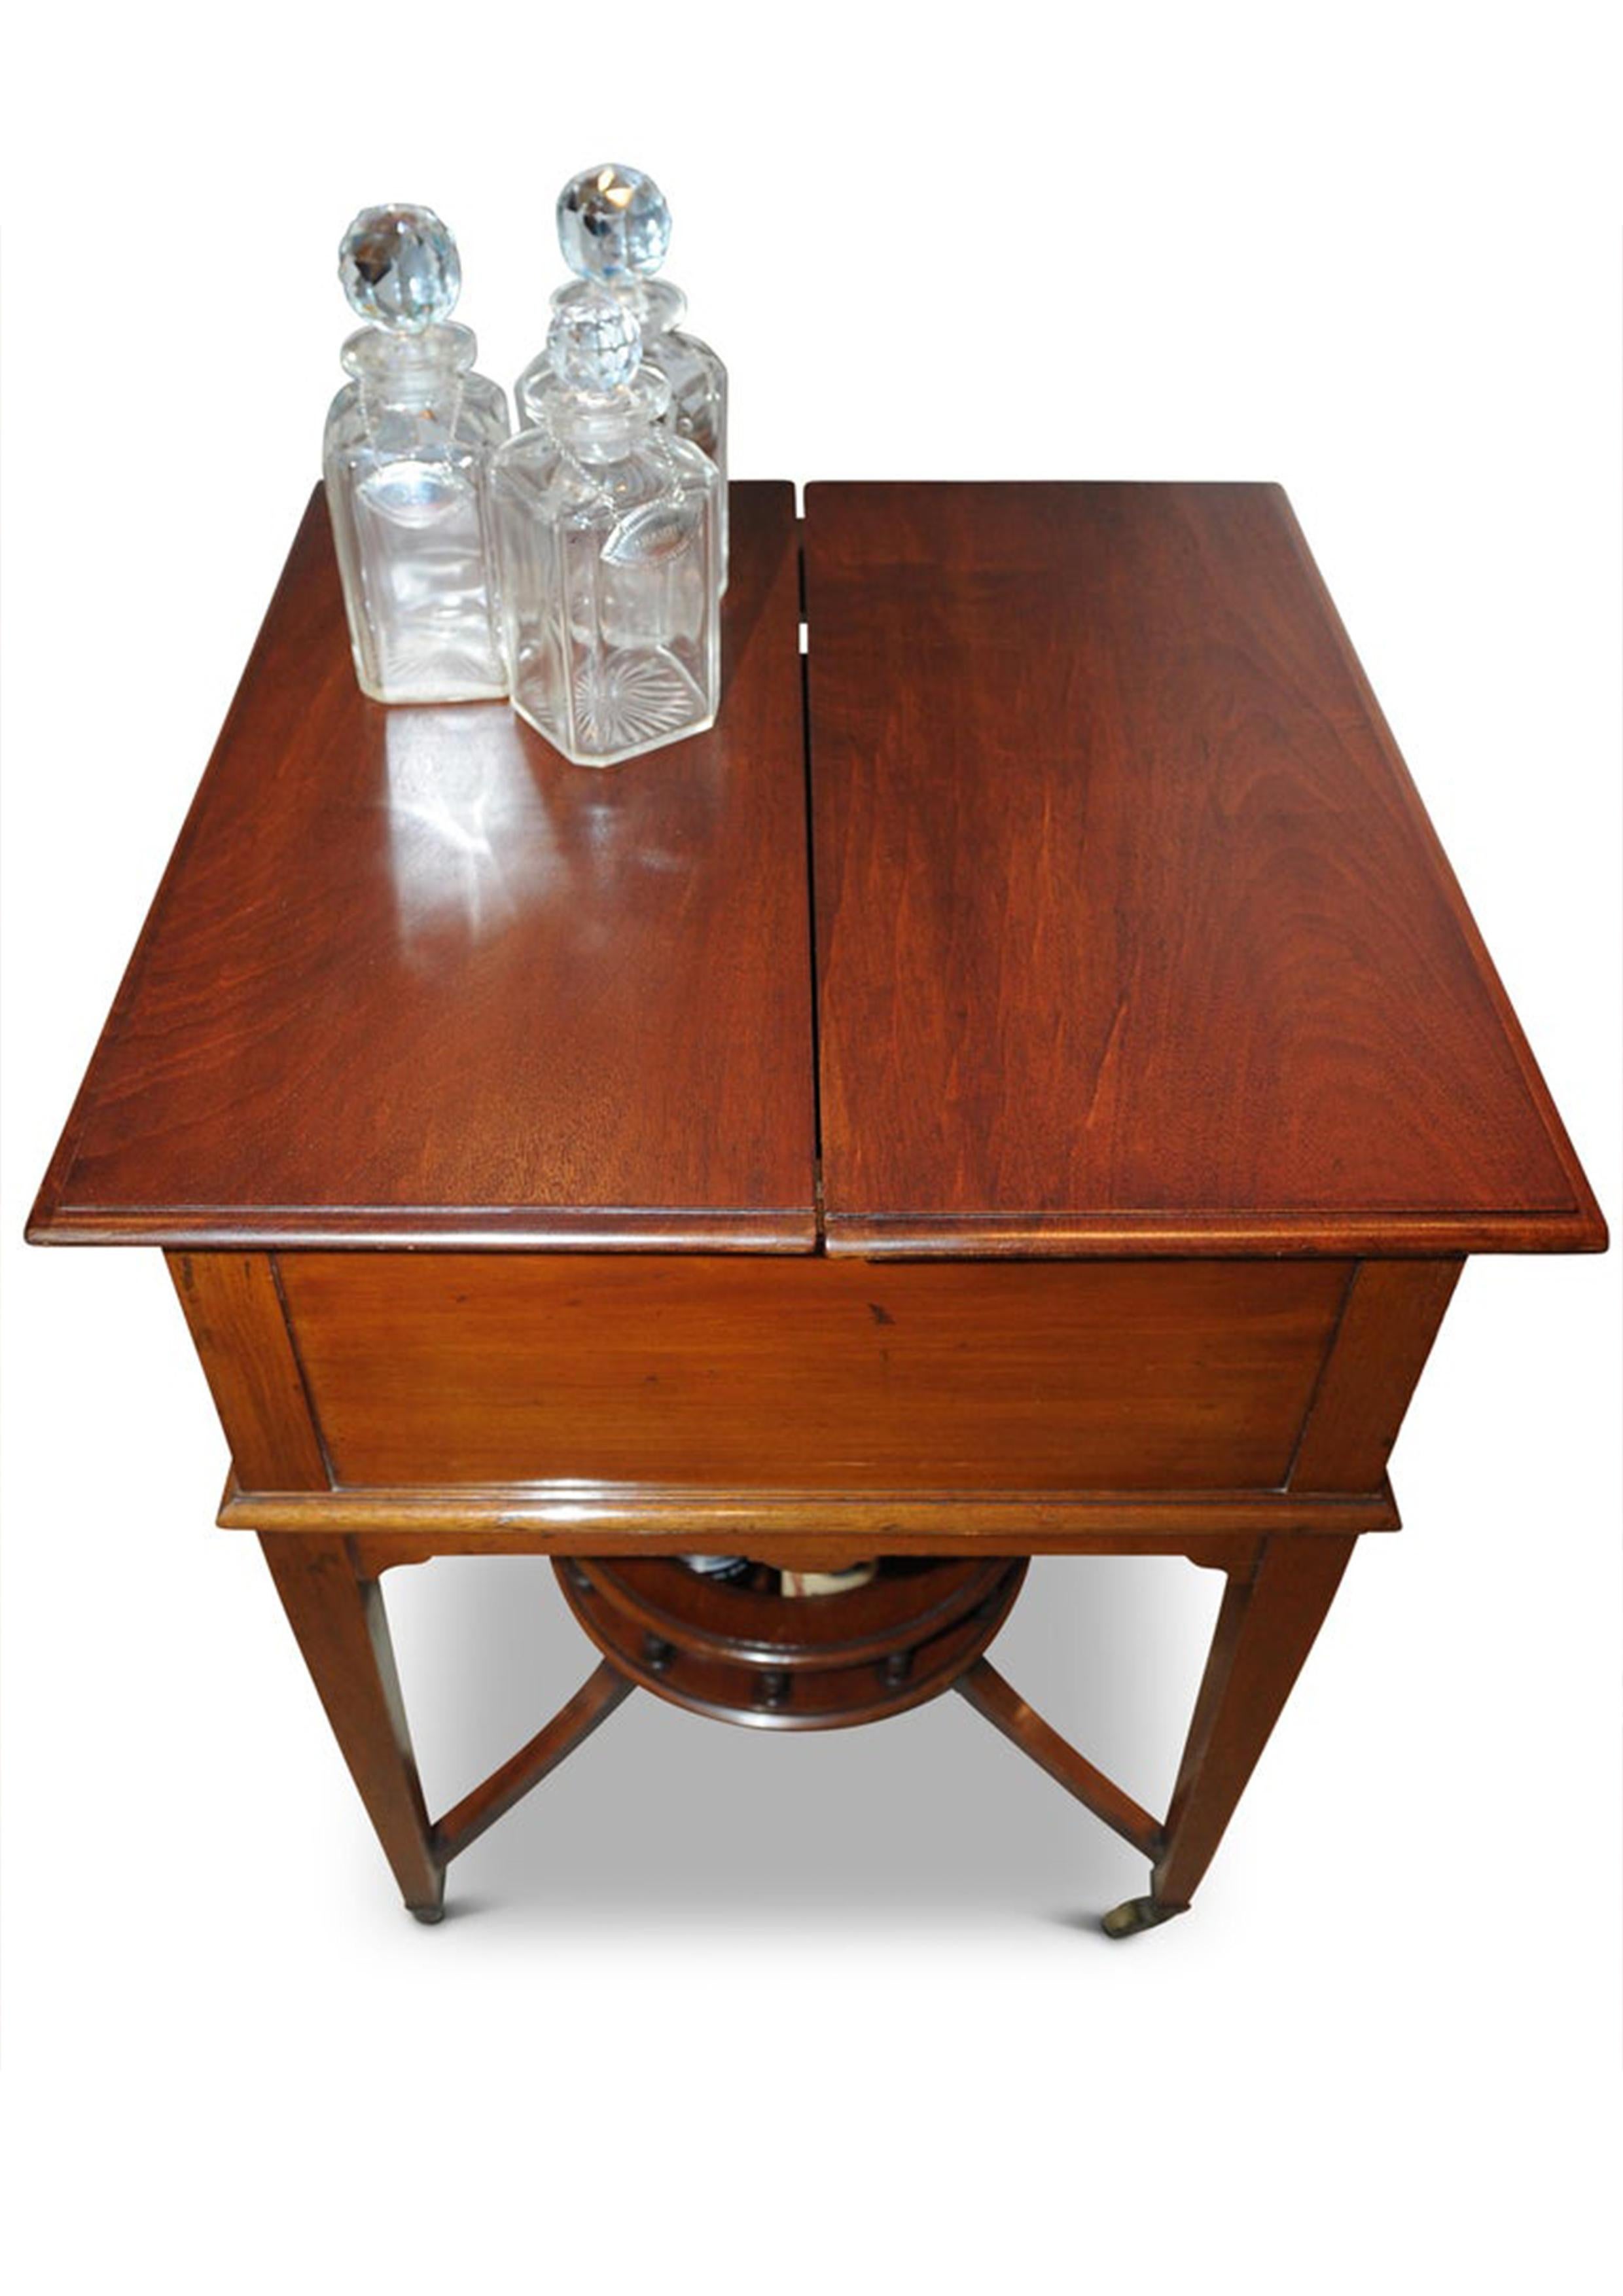 Hand-Crafted Asprey & Co. London 1920s Mahogany Pop Up Dry Bar Drinks Cabinet and Decanters